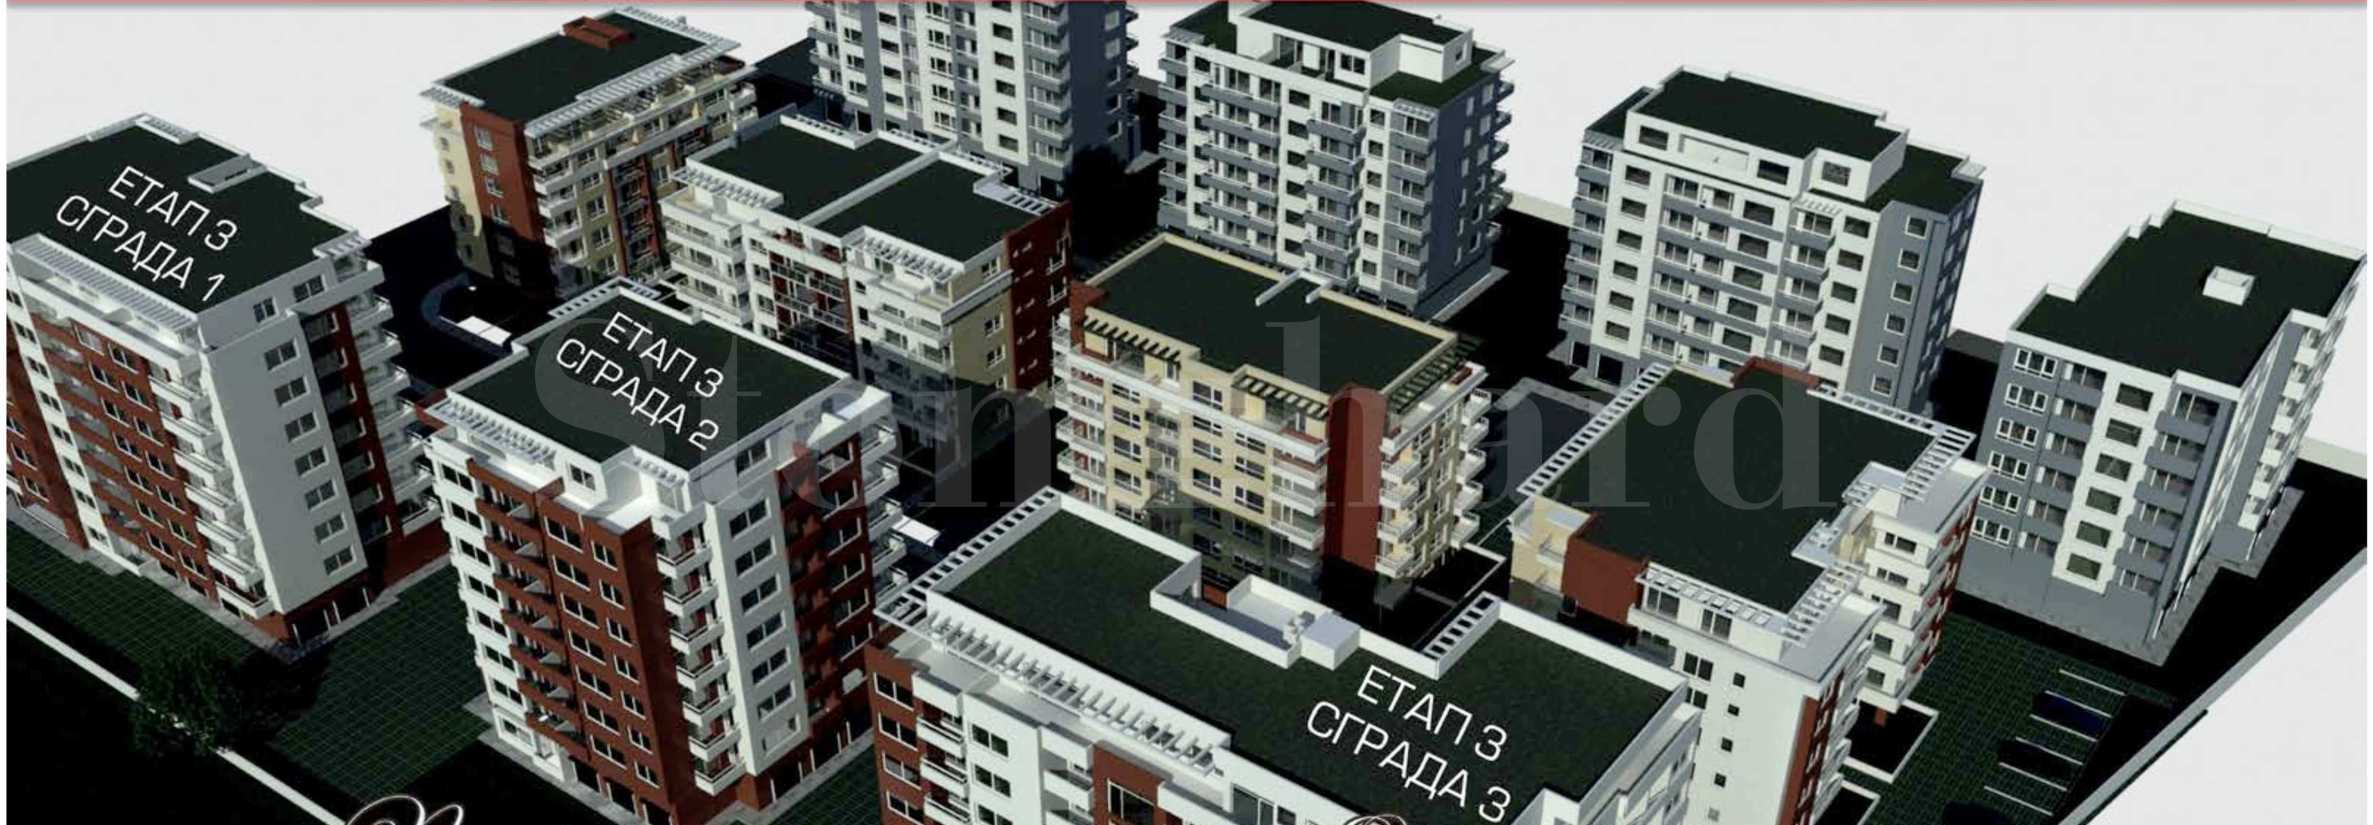 New complex of apartments in the southern part of Plovdiv1 - Stonehard